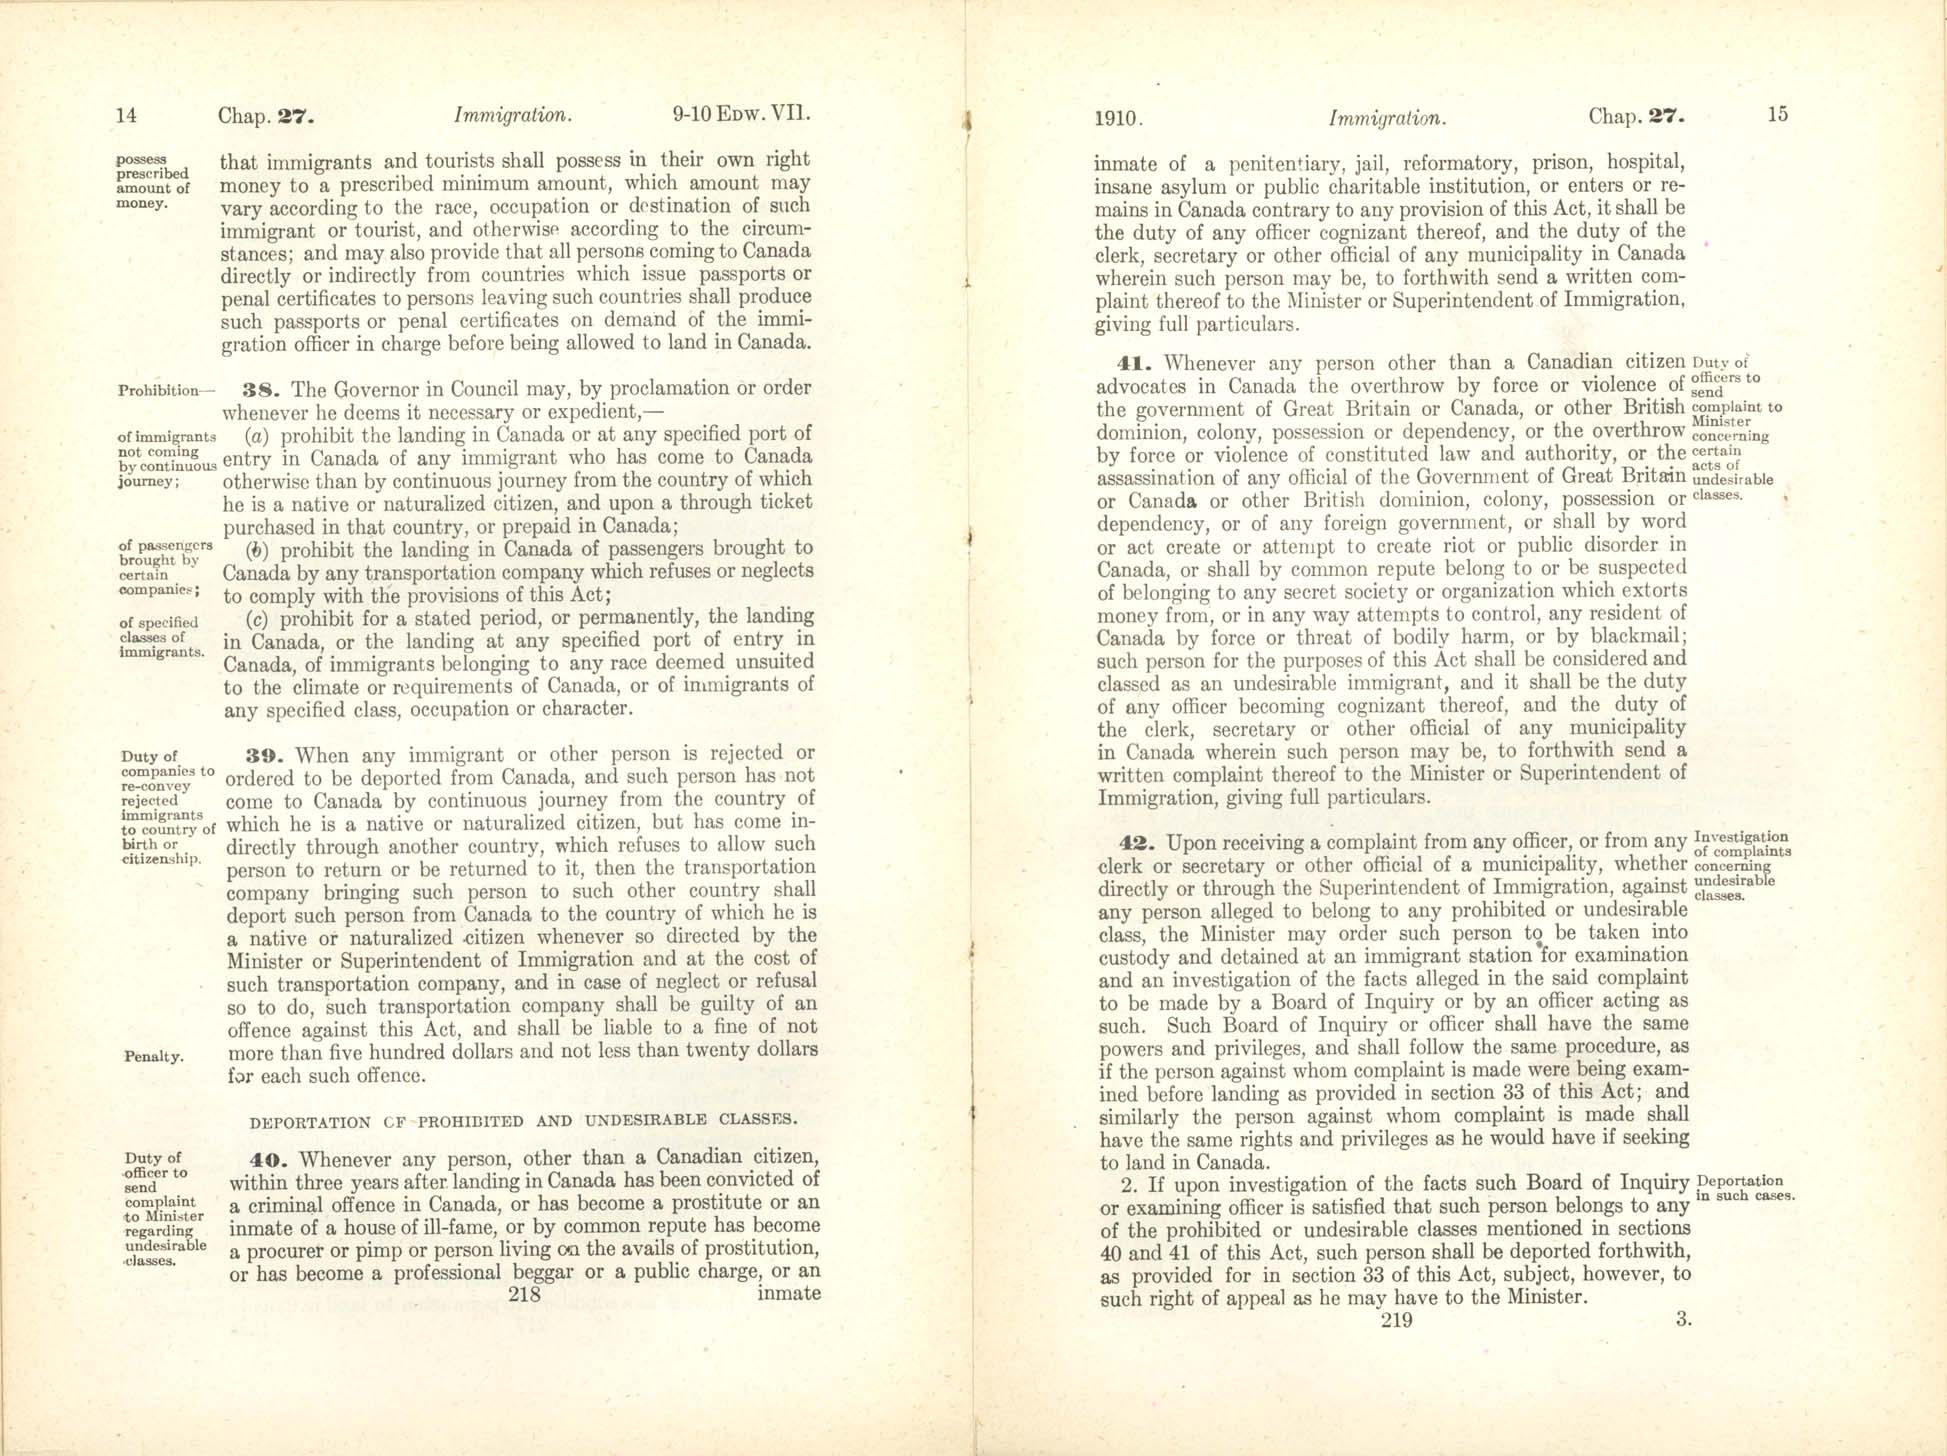 Chap. 27 Page 218, 219 Immigration Act, 1910